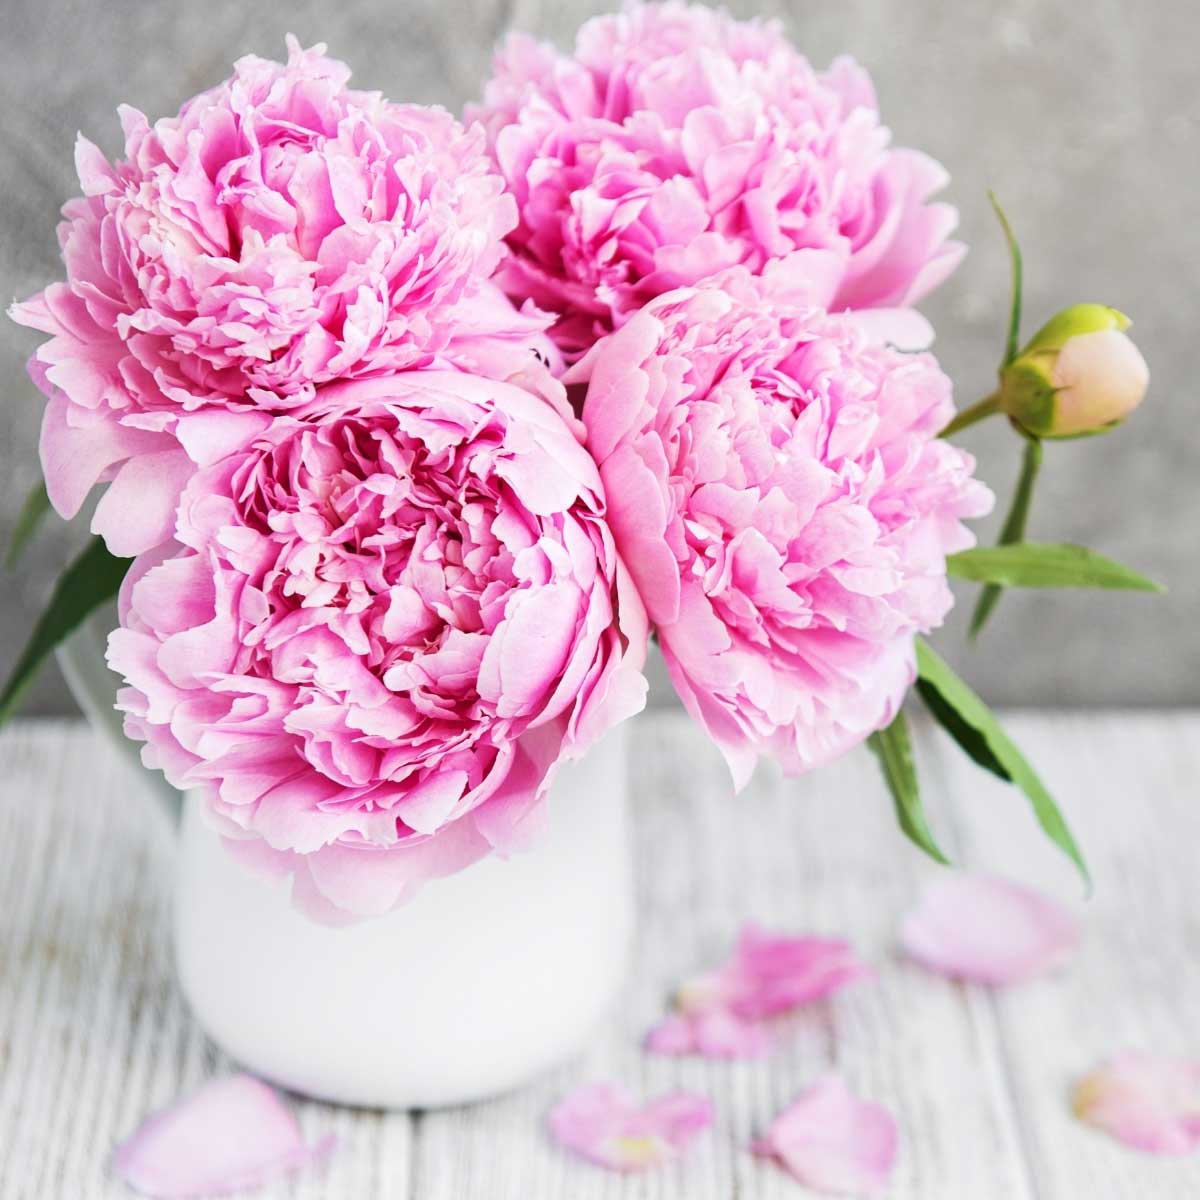 Pink peonies in a vase on a white wooden table